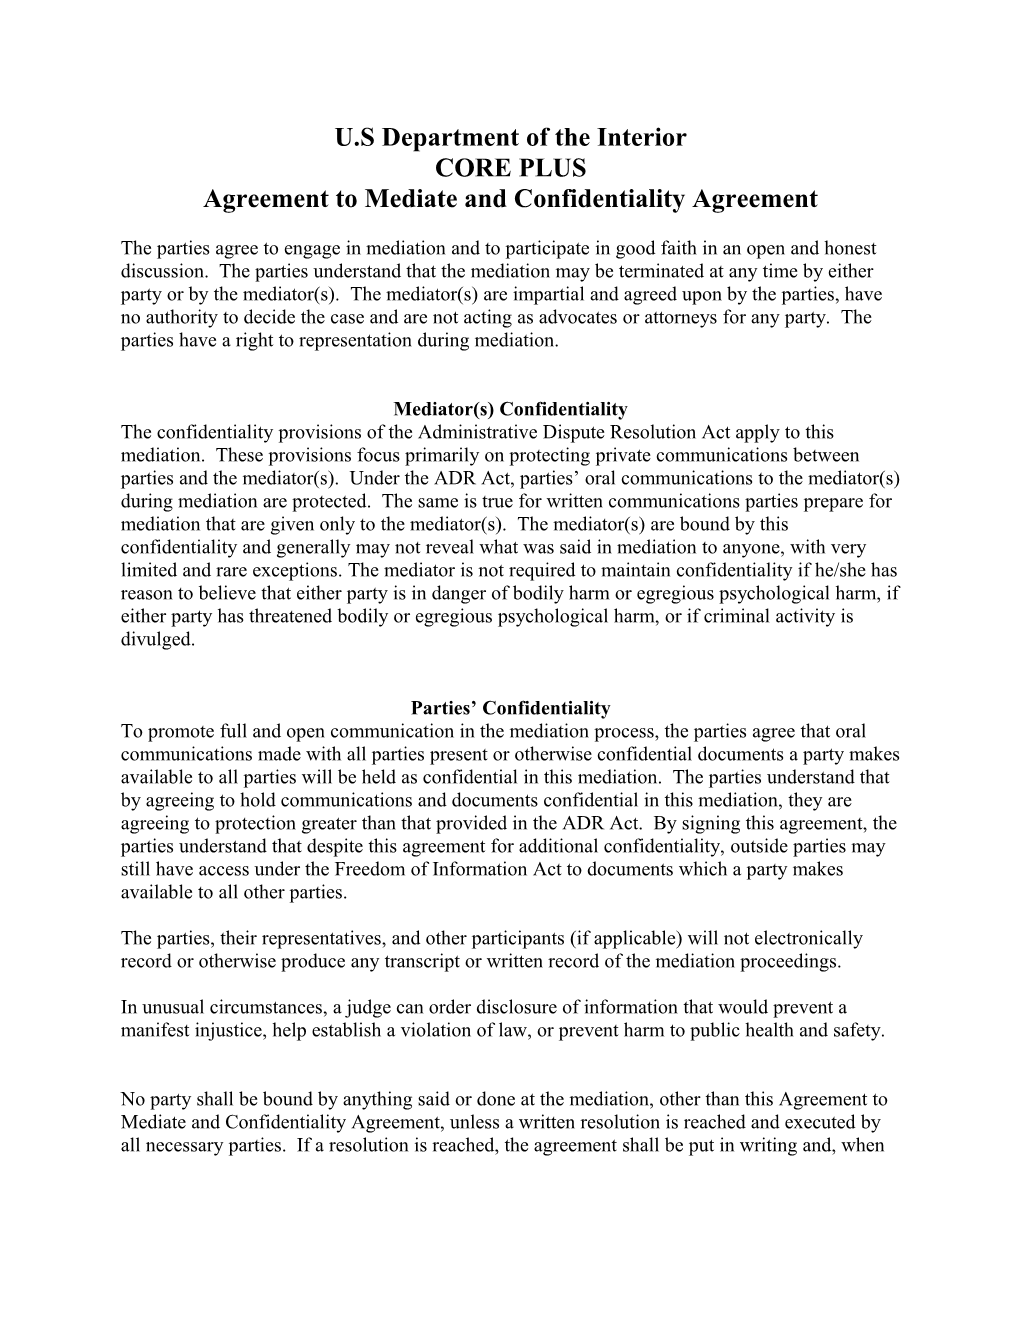 CORE PLUS Agreement to Mediate